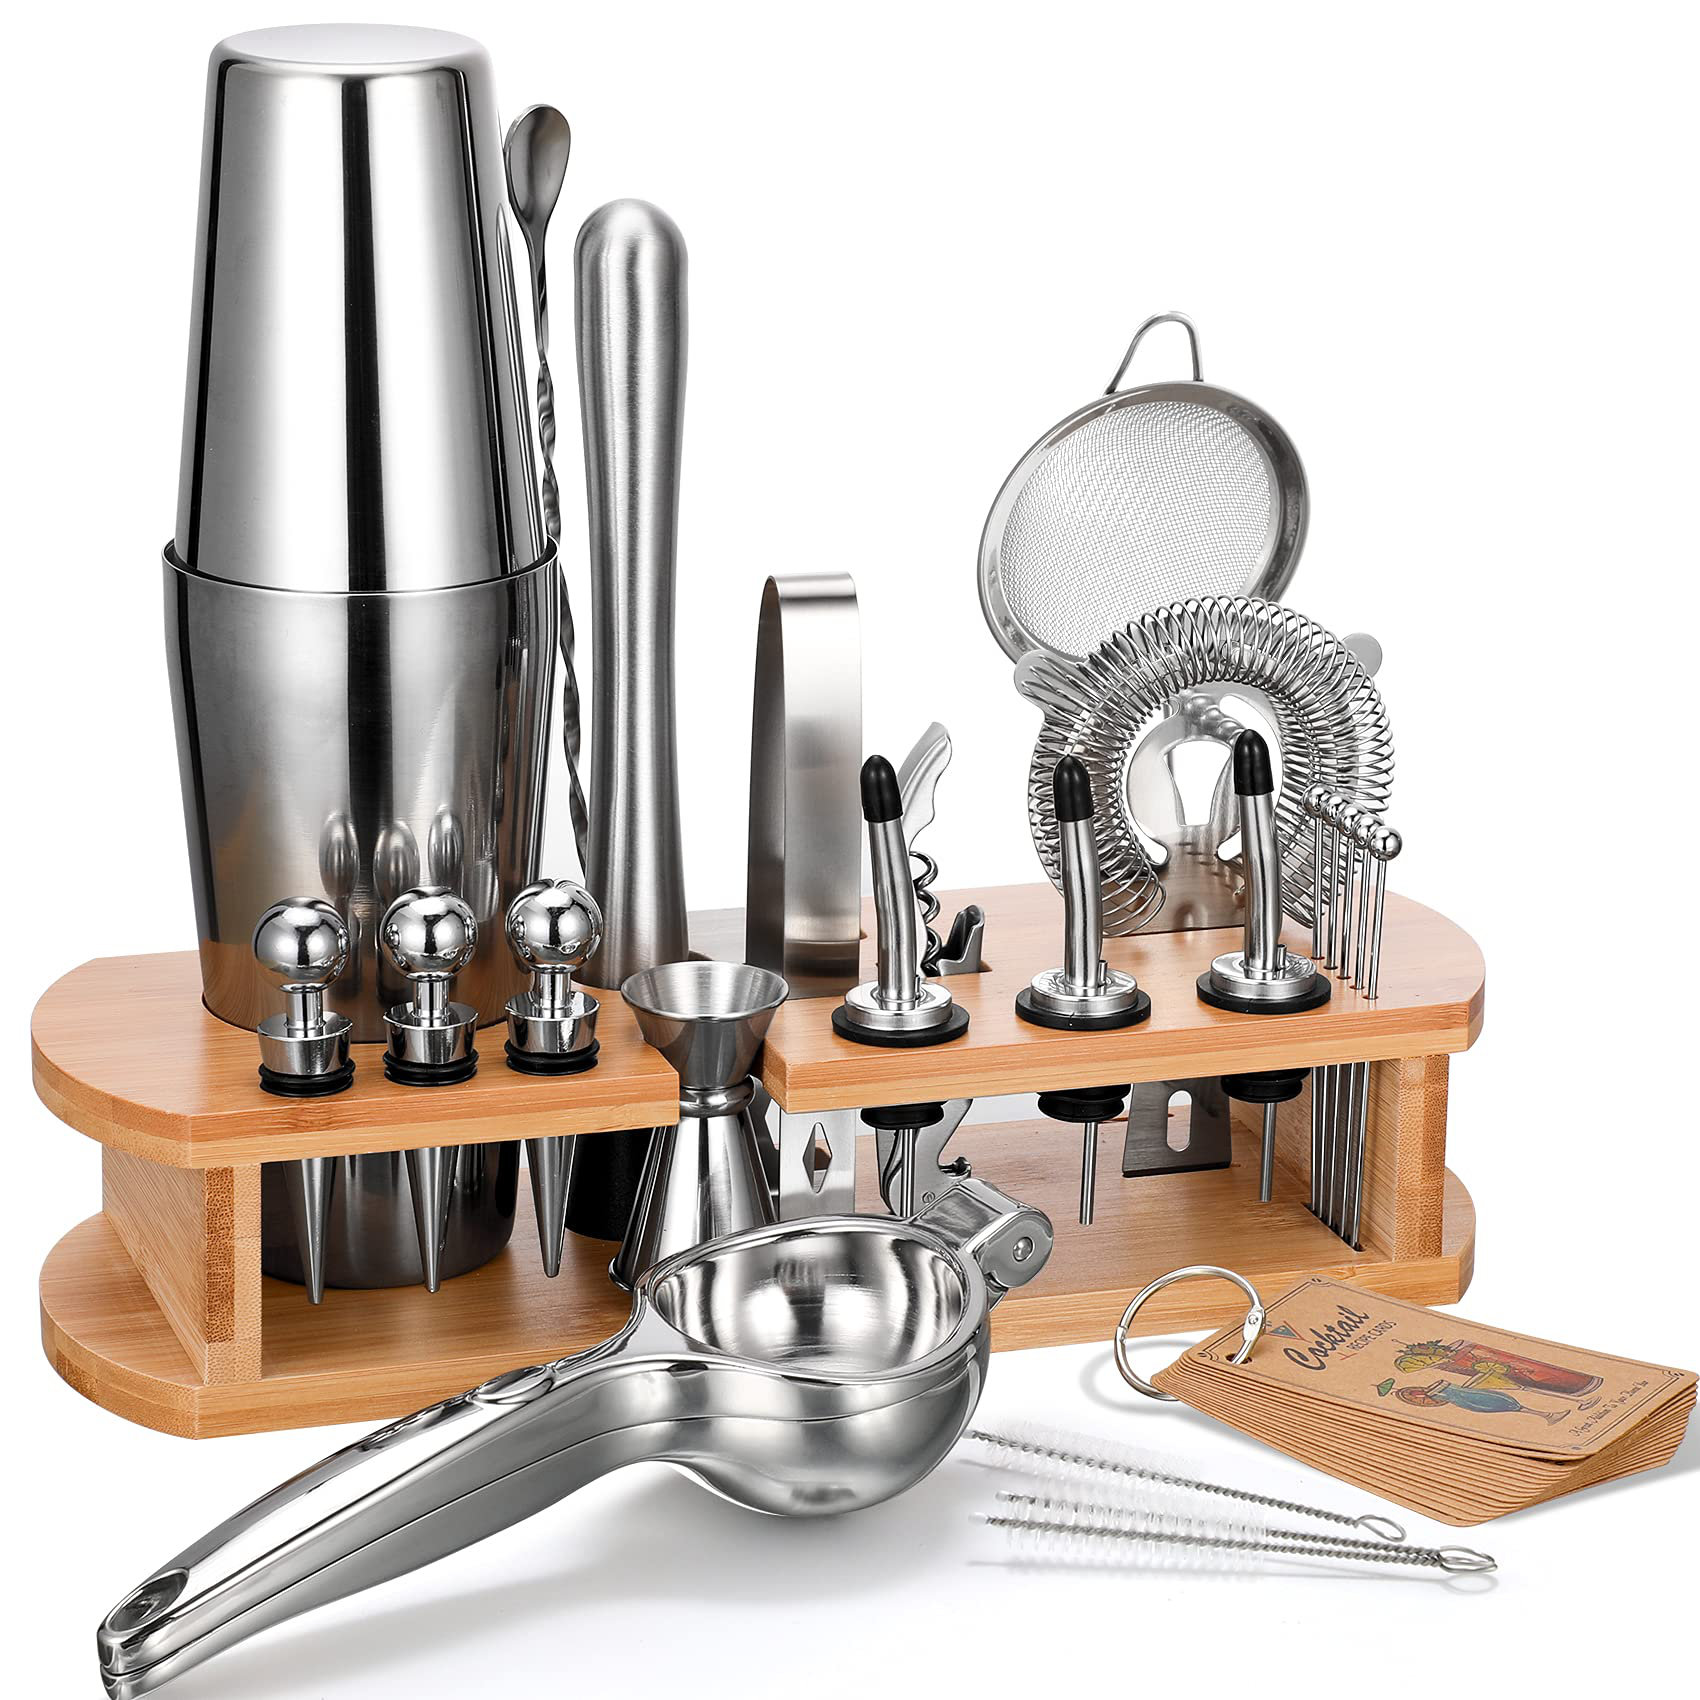 Prep & Savour 24-Piece Cocktail Shaker Bartender Kit With Stand, Shaker,  Mixing Spoon, Muddler, Measuring Jigger, Lemon Squeez, Tongs, Corkscrew,  Liquor Pourers And More Professional Bar Tools(Brown, Silver)